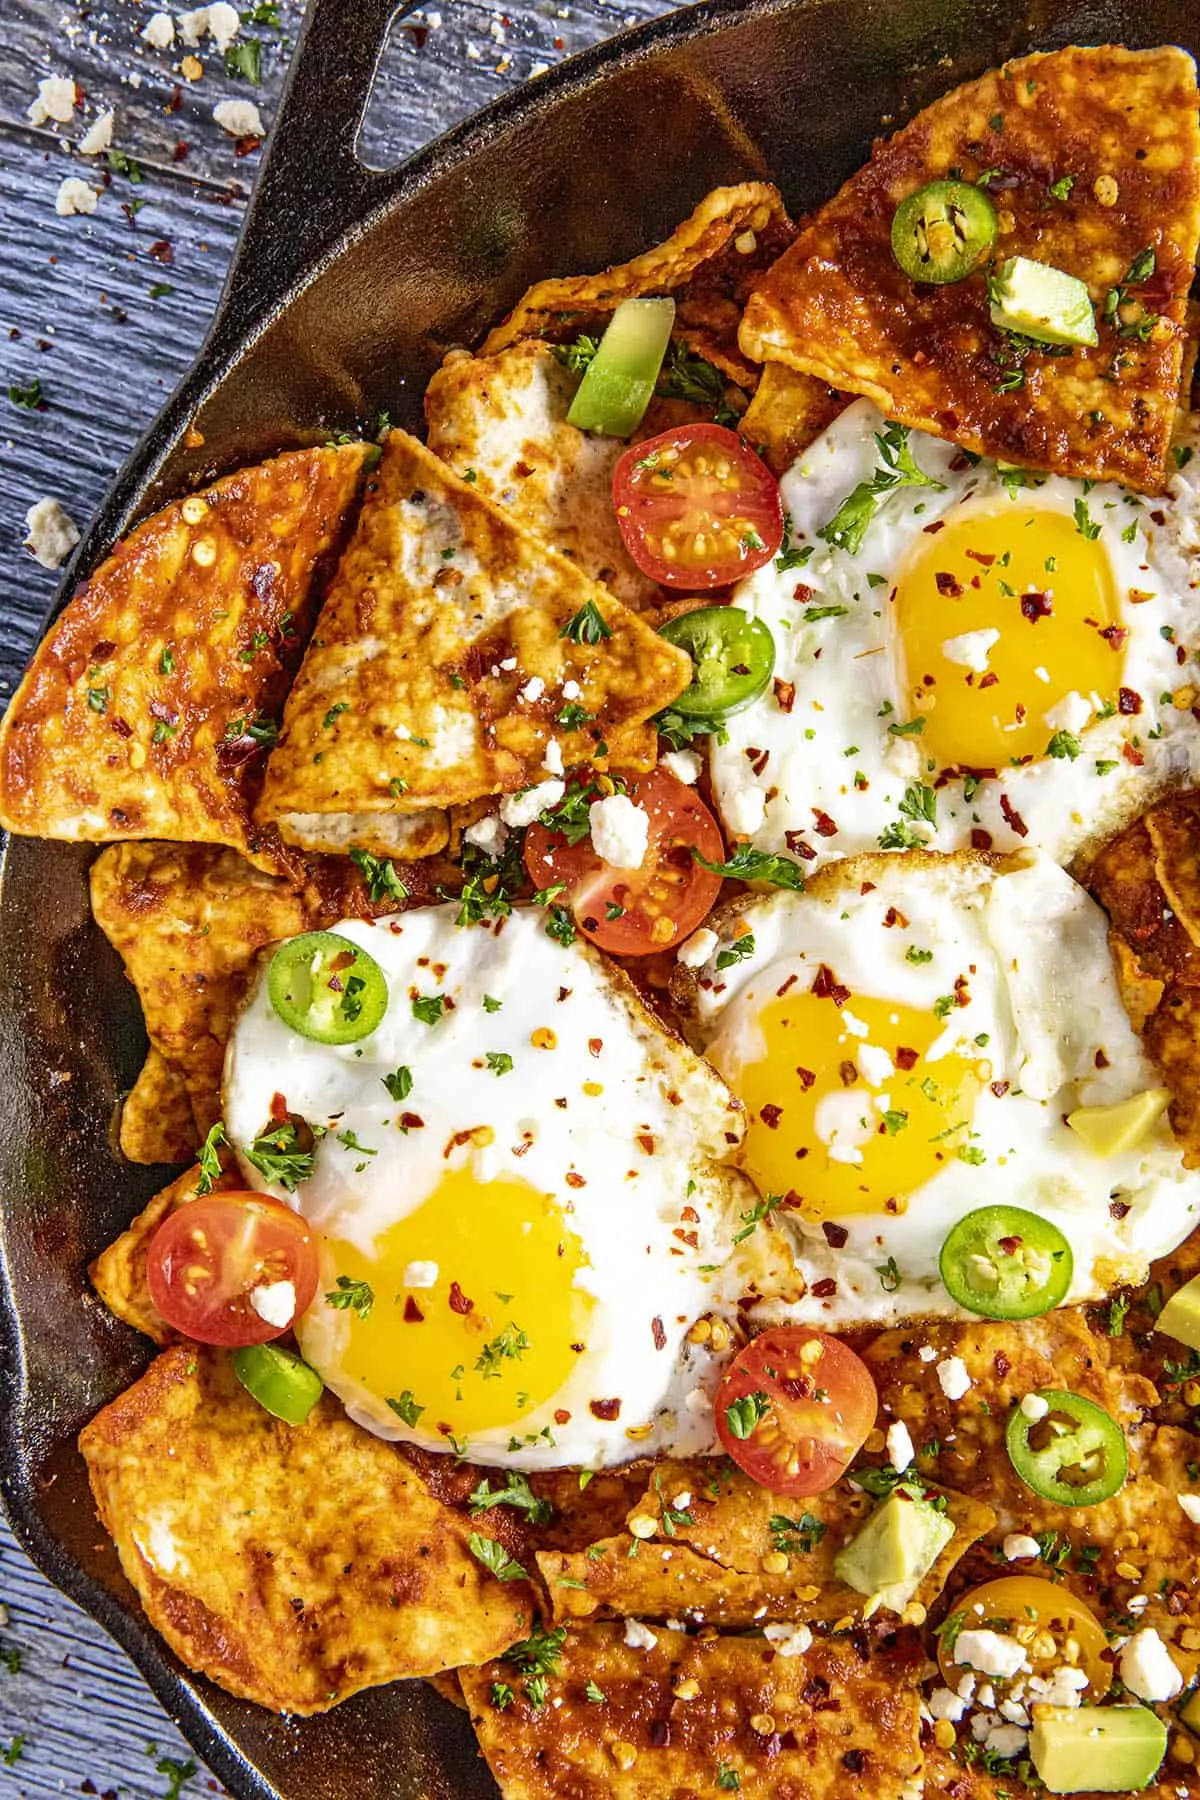 Big scoops of saucy chilaquiles rojos with fried eggs